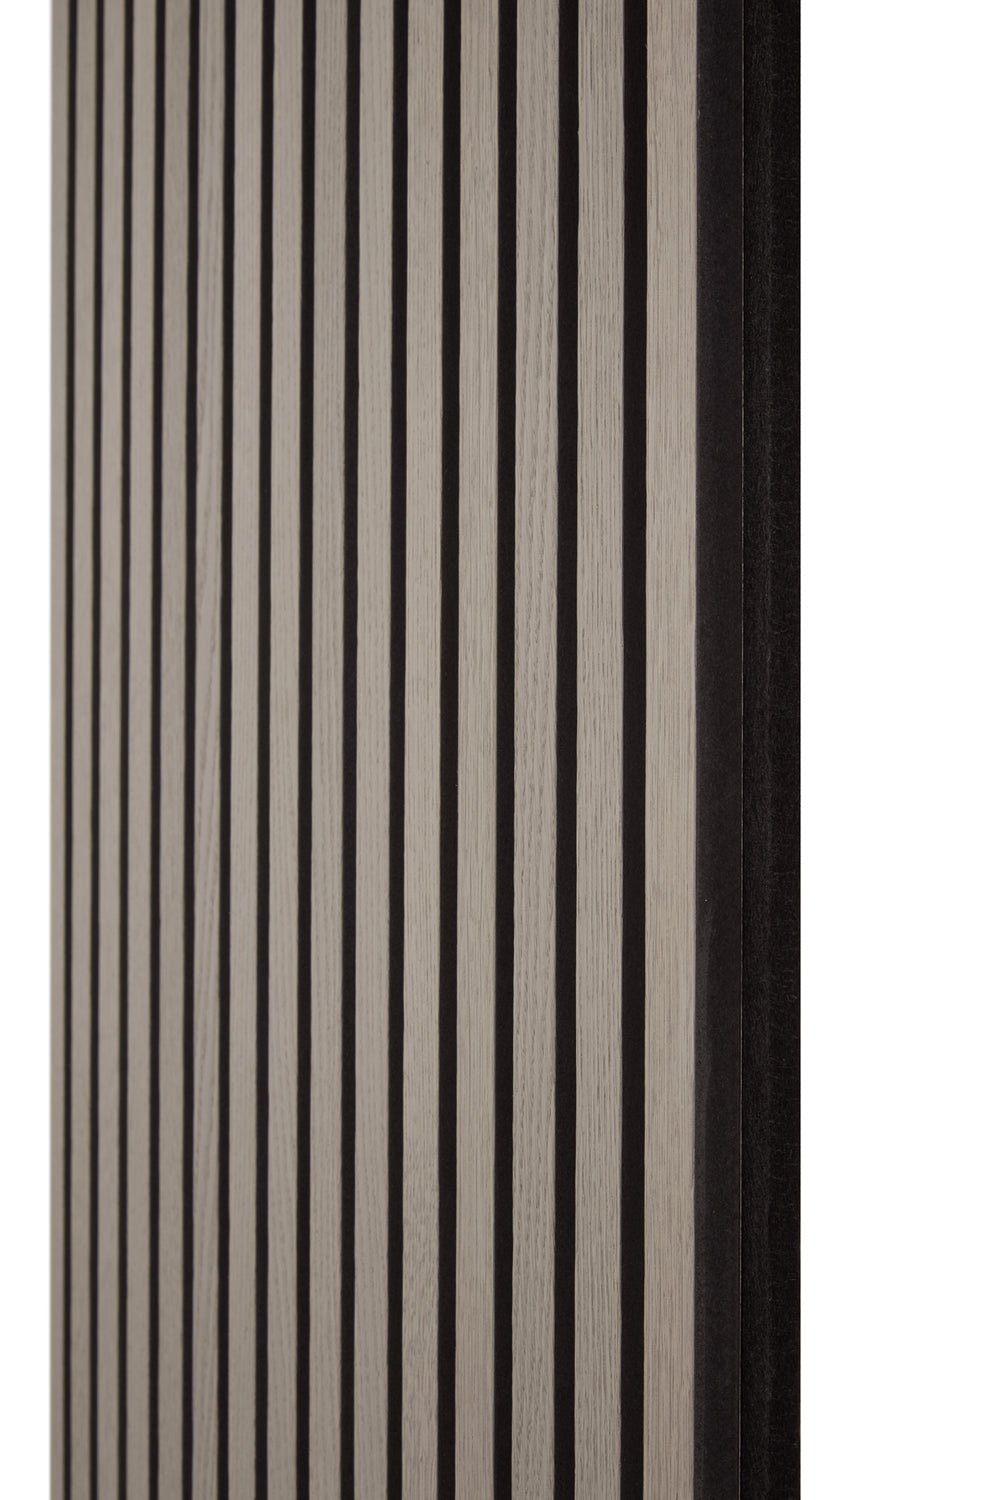 Side view of the Grey Oak Acoustic SlatWall Panel from Naturewall.